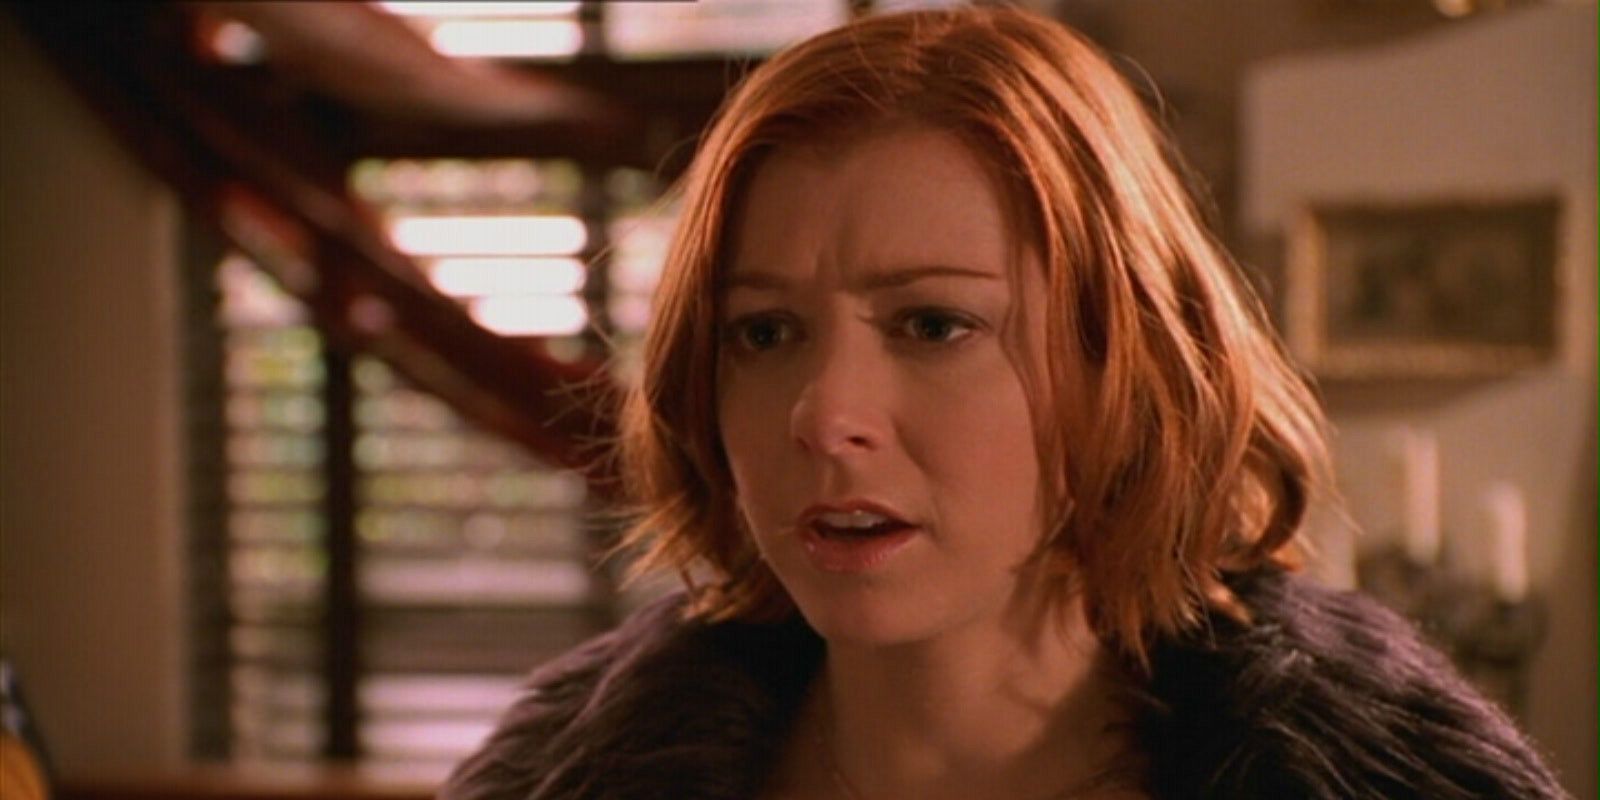 Alyson Hannigan as Willow in Buffy the Vampire Slayer